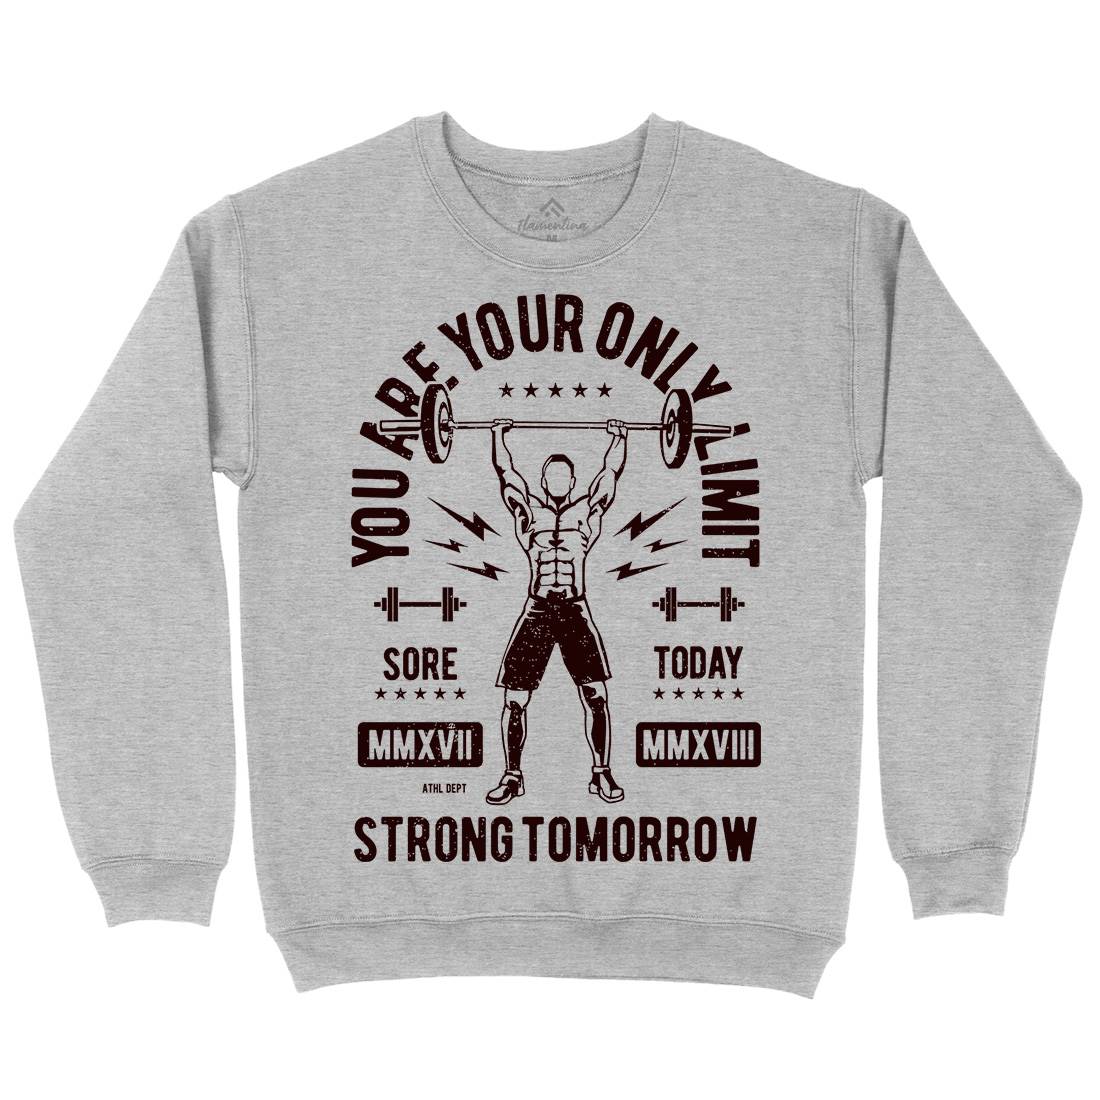 You Are Your Only Limit Kids Crew Neck Sweatshirt Gym A799